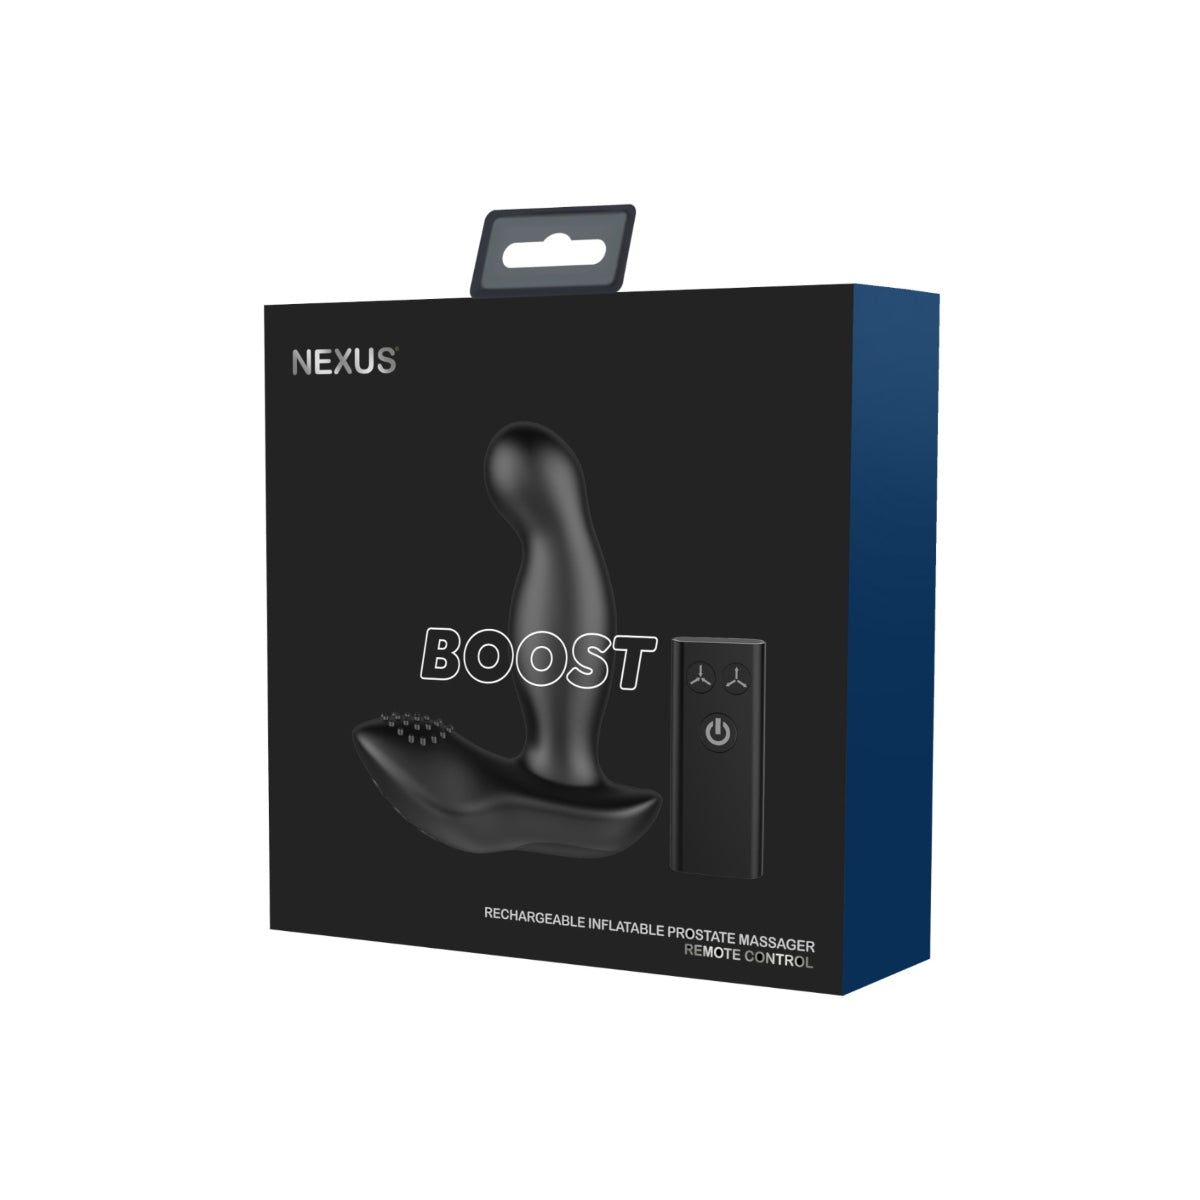 Nexus Boost Rechargeable Inflatable Remote Control Prostate Massager Black